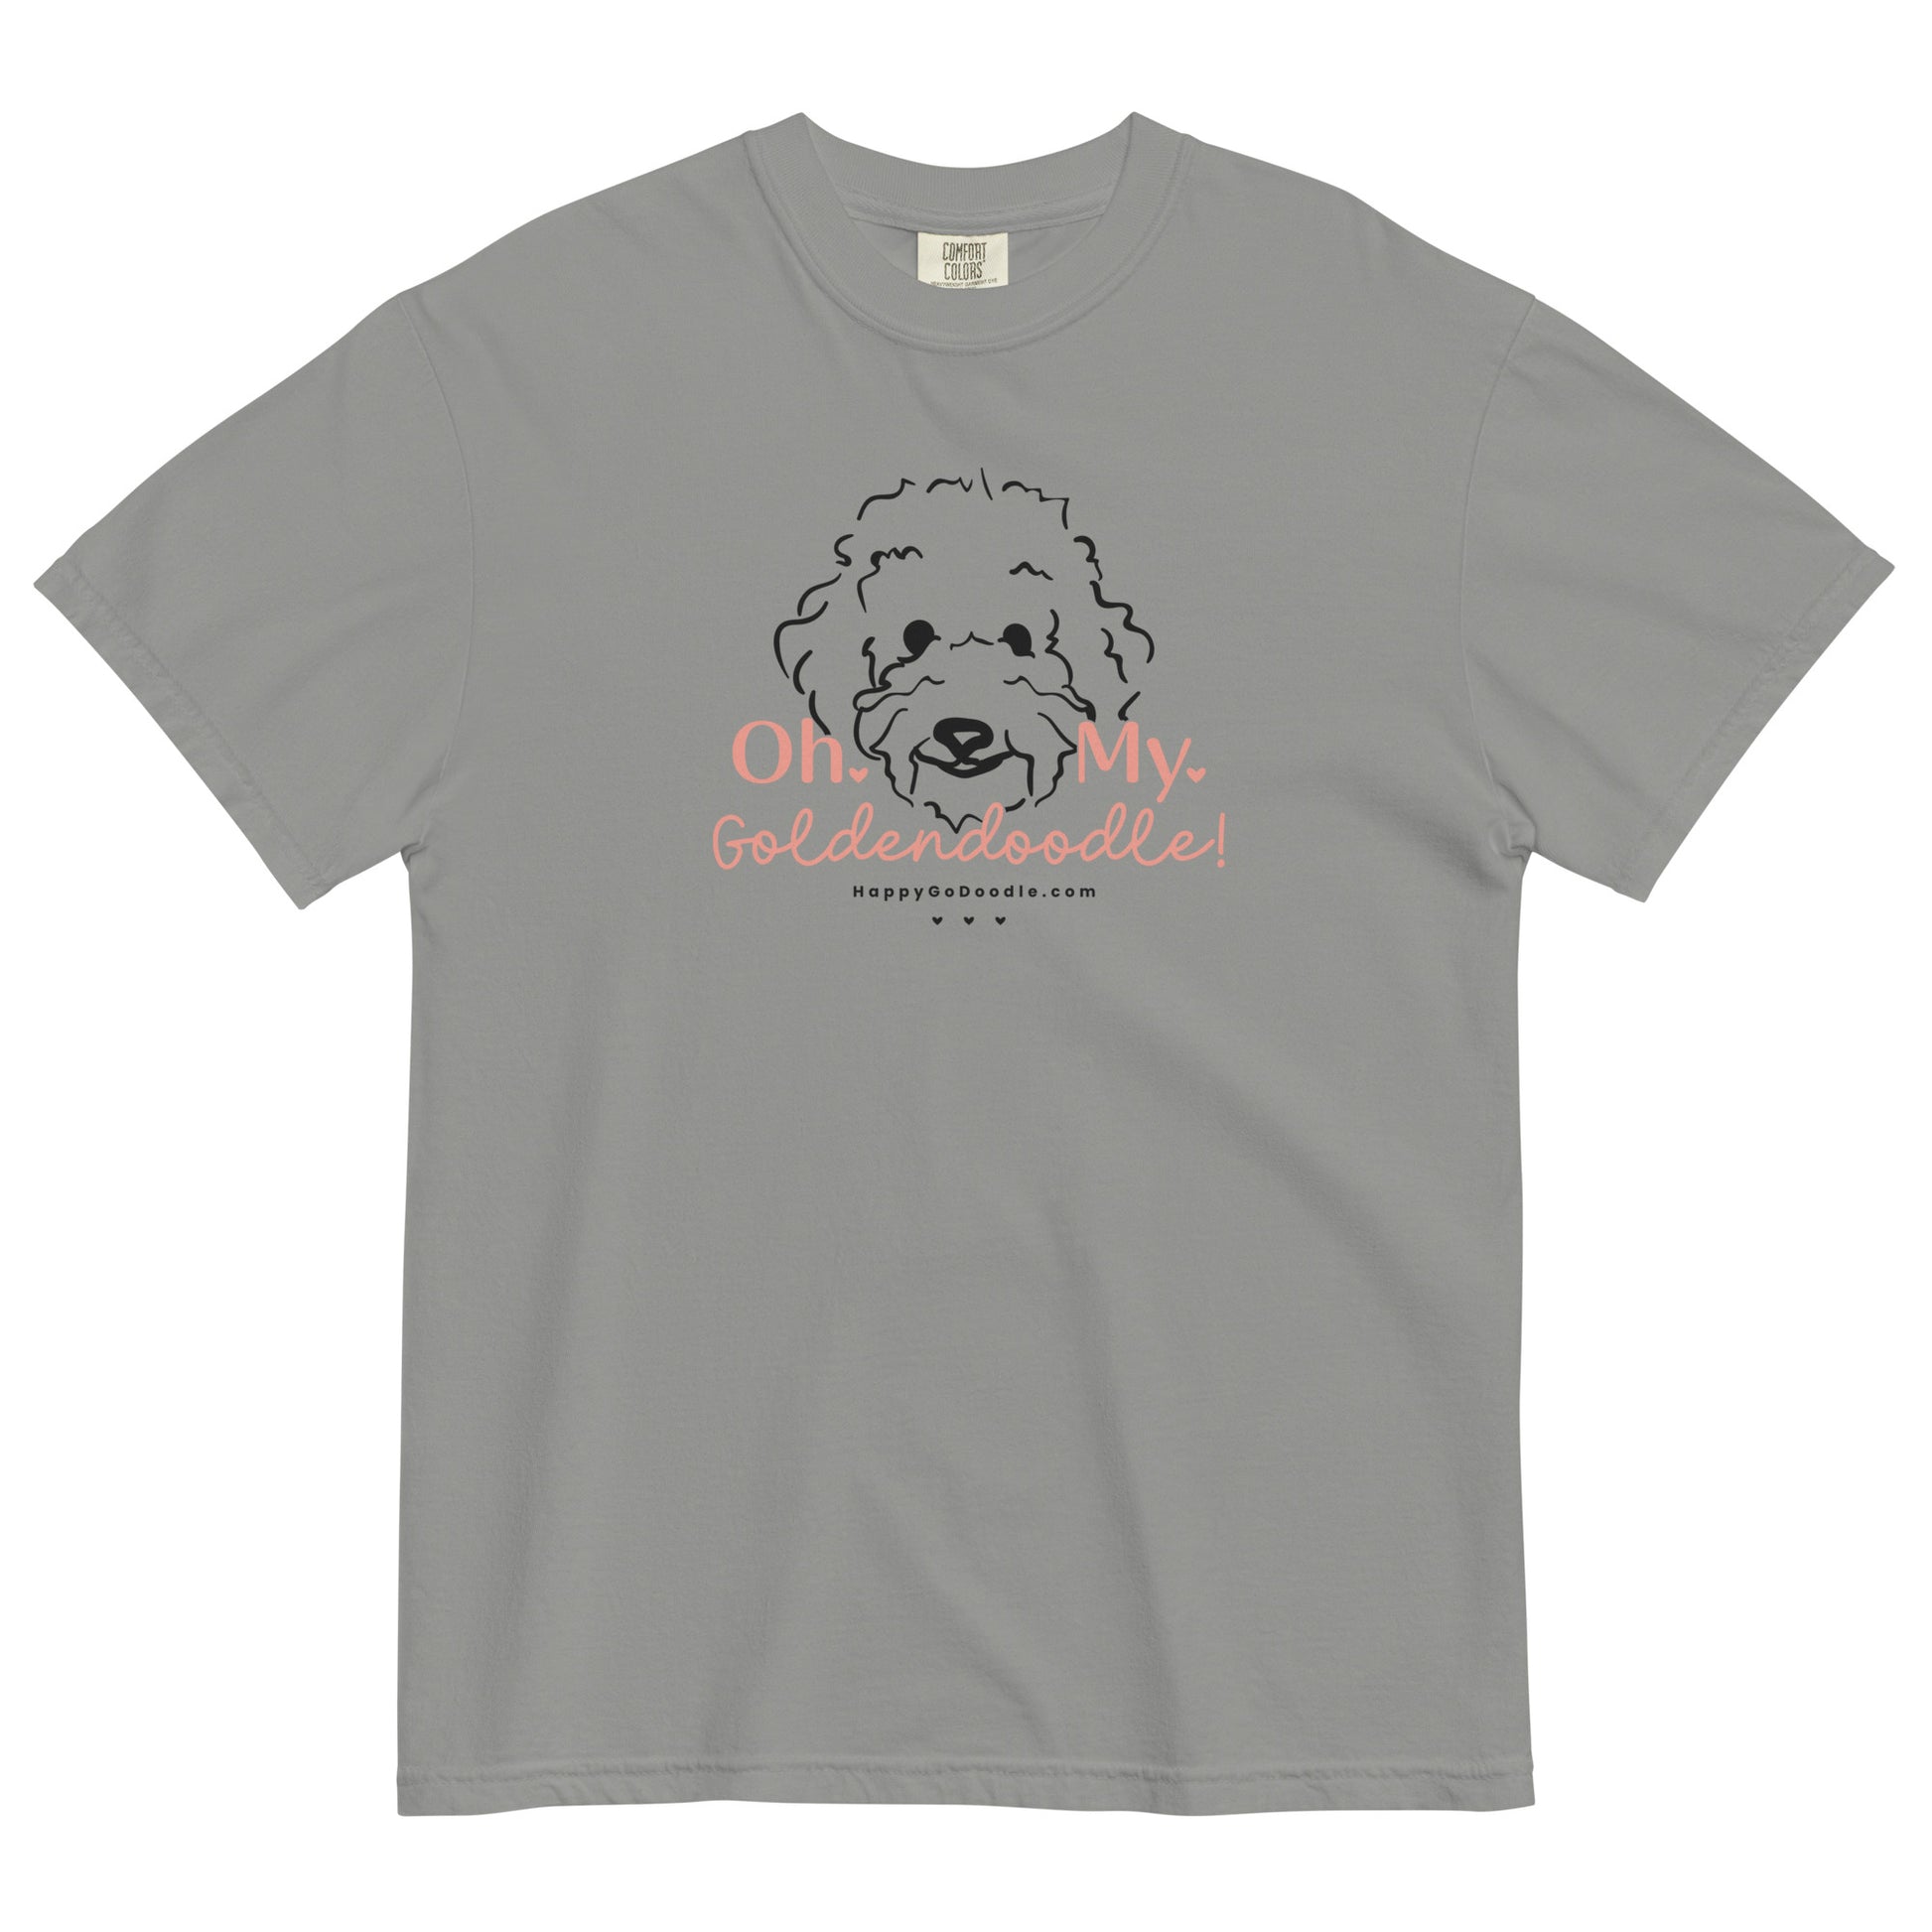 Goldendoodle comfort colors t-shirt with Goldendoodle dog face and words "Oh My Goldendoodle" in gray color